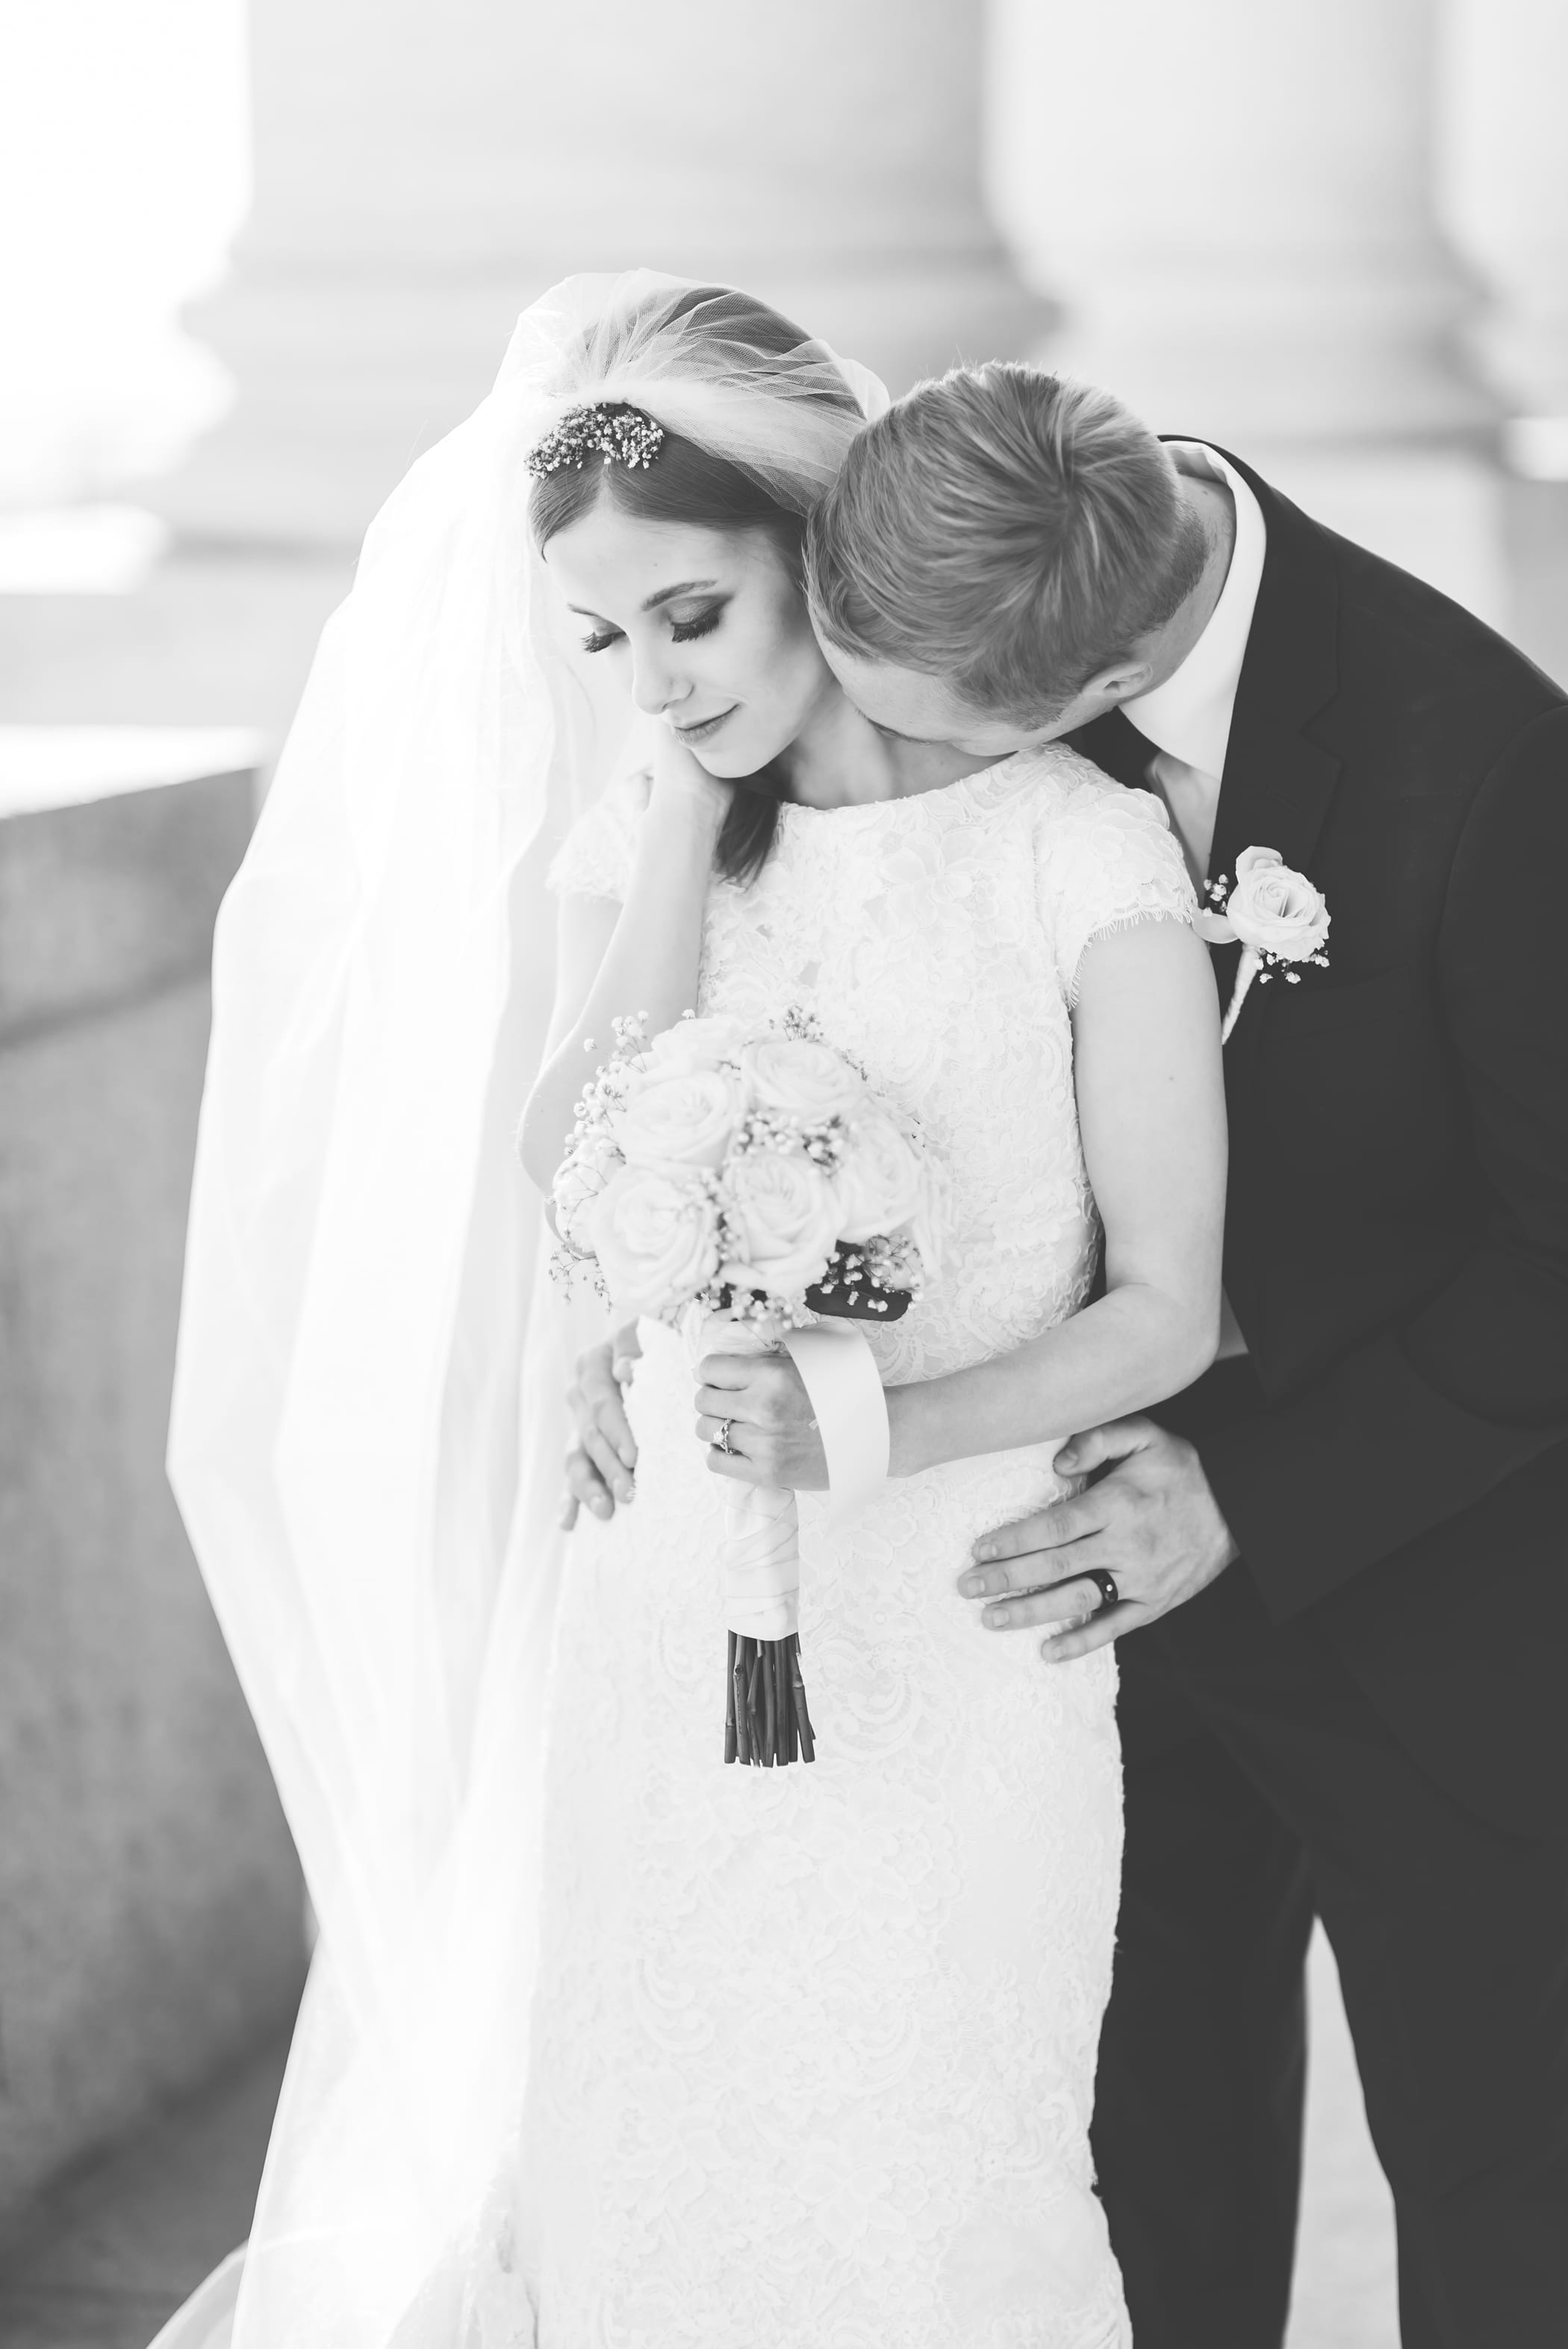 Timeless black and white romantic photograph at Utah State Capitol